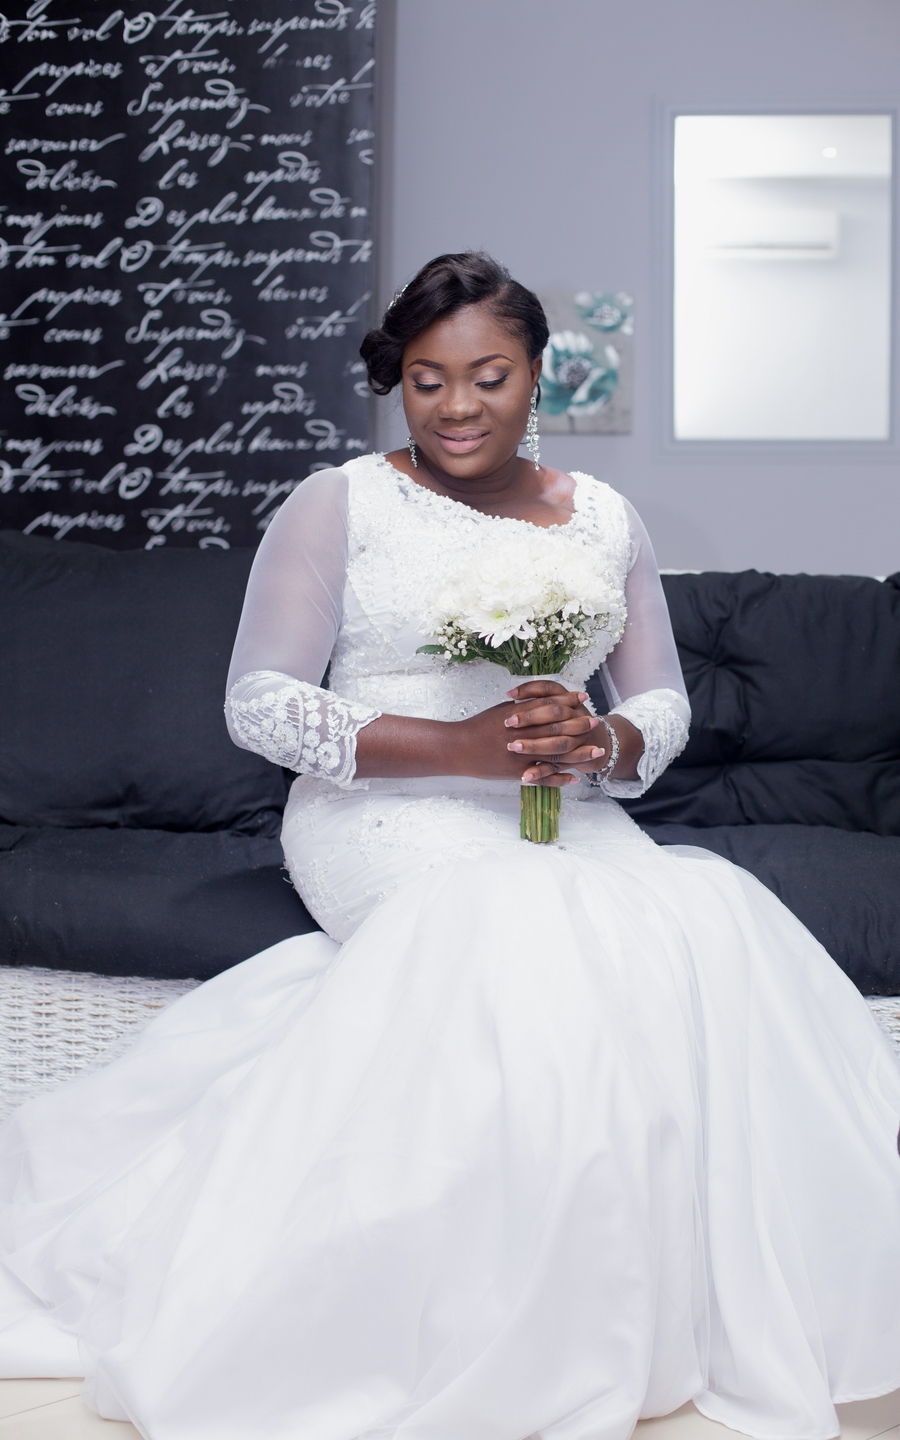 The Pros and Cons of Wearing a Black Wedding Dress | by Brides and tailor |  Medium